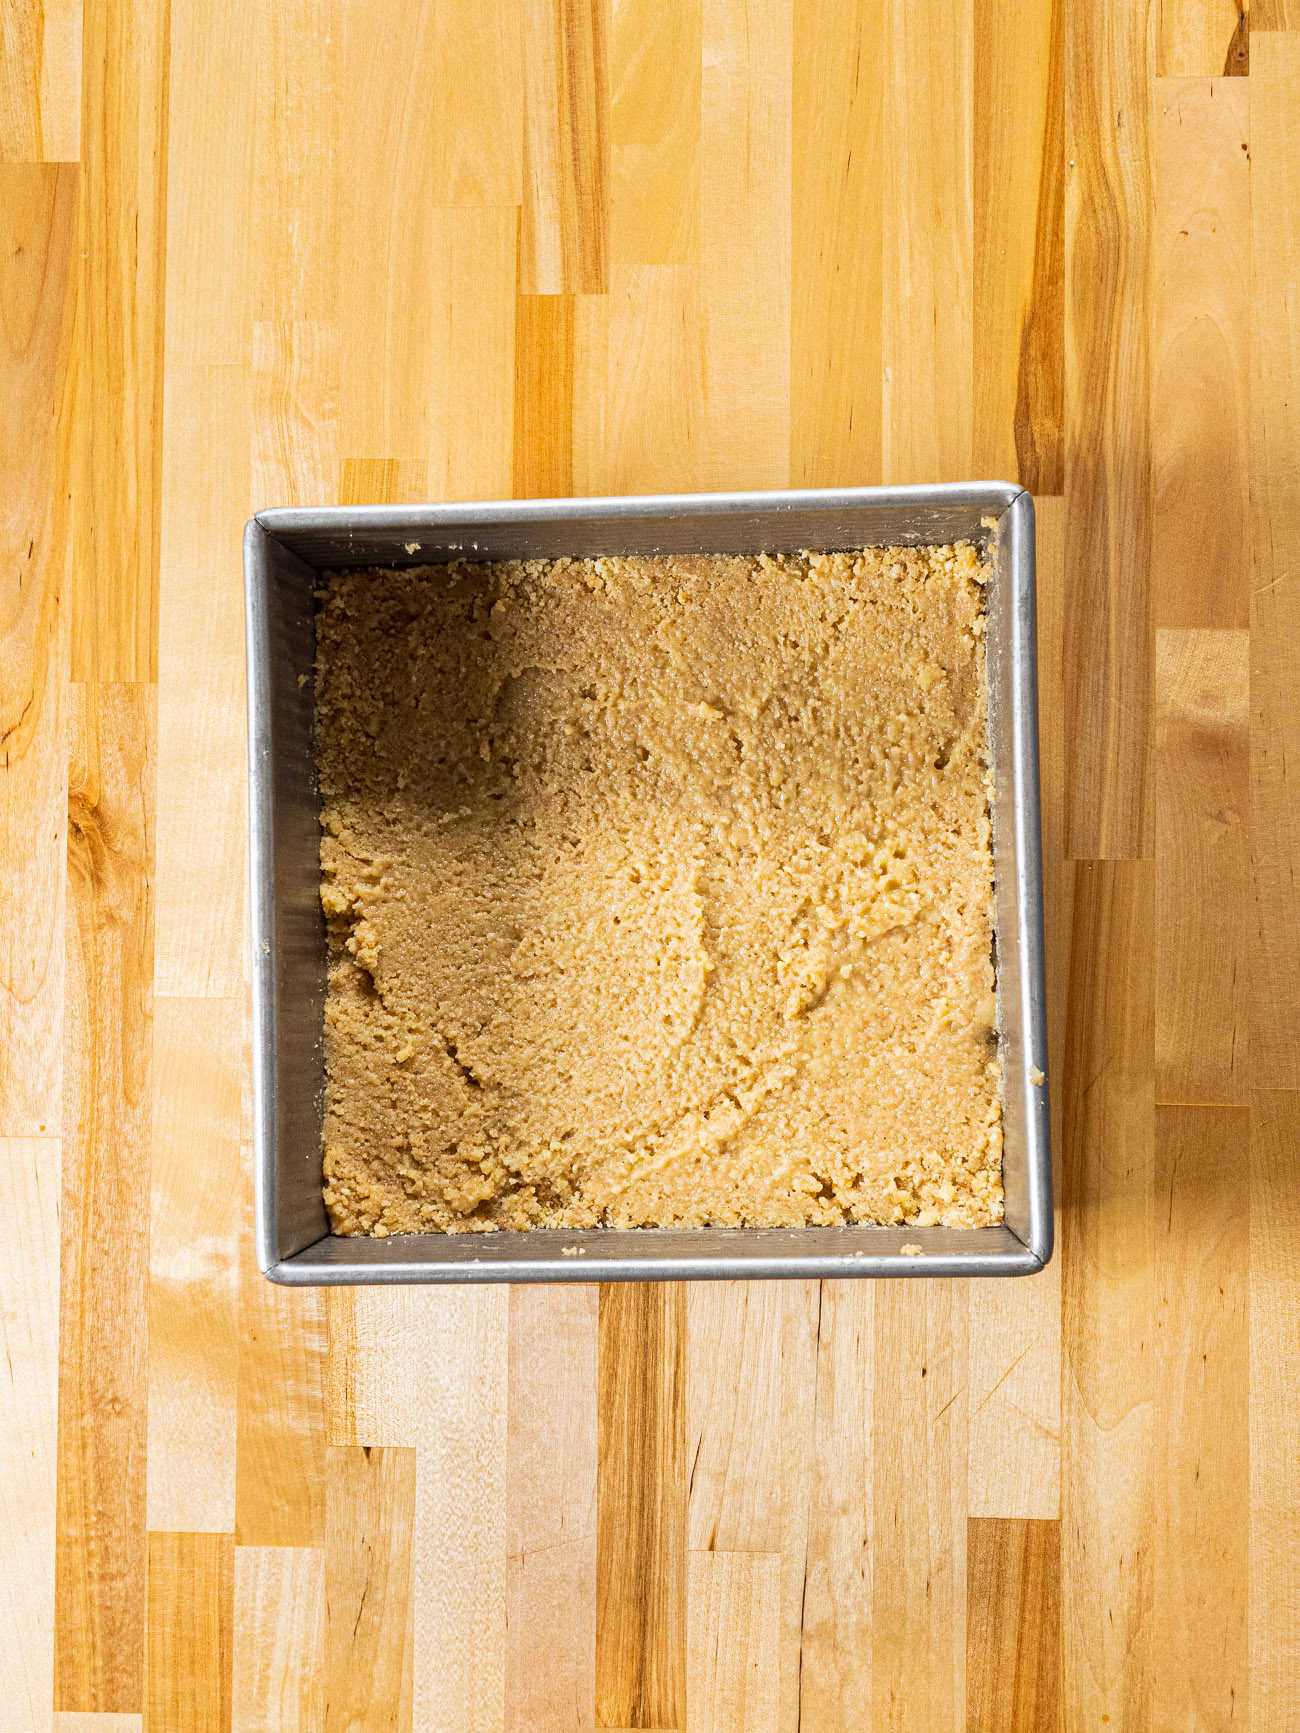 Press the shortbread mixture into the pan in an even layer. Refrigerate until firm.